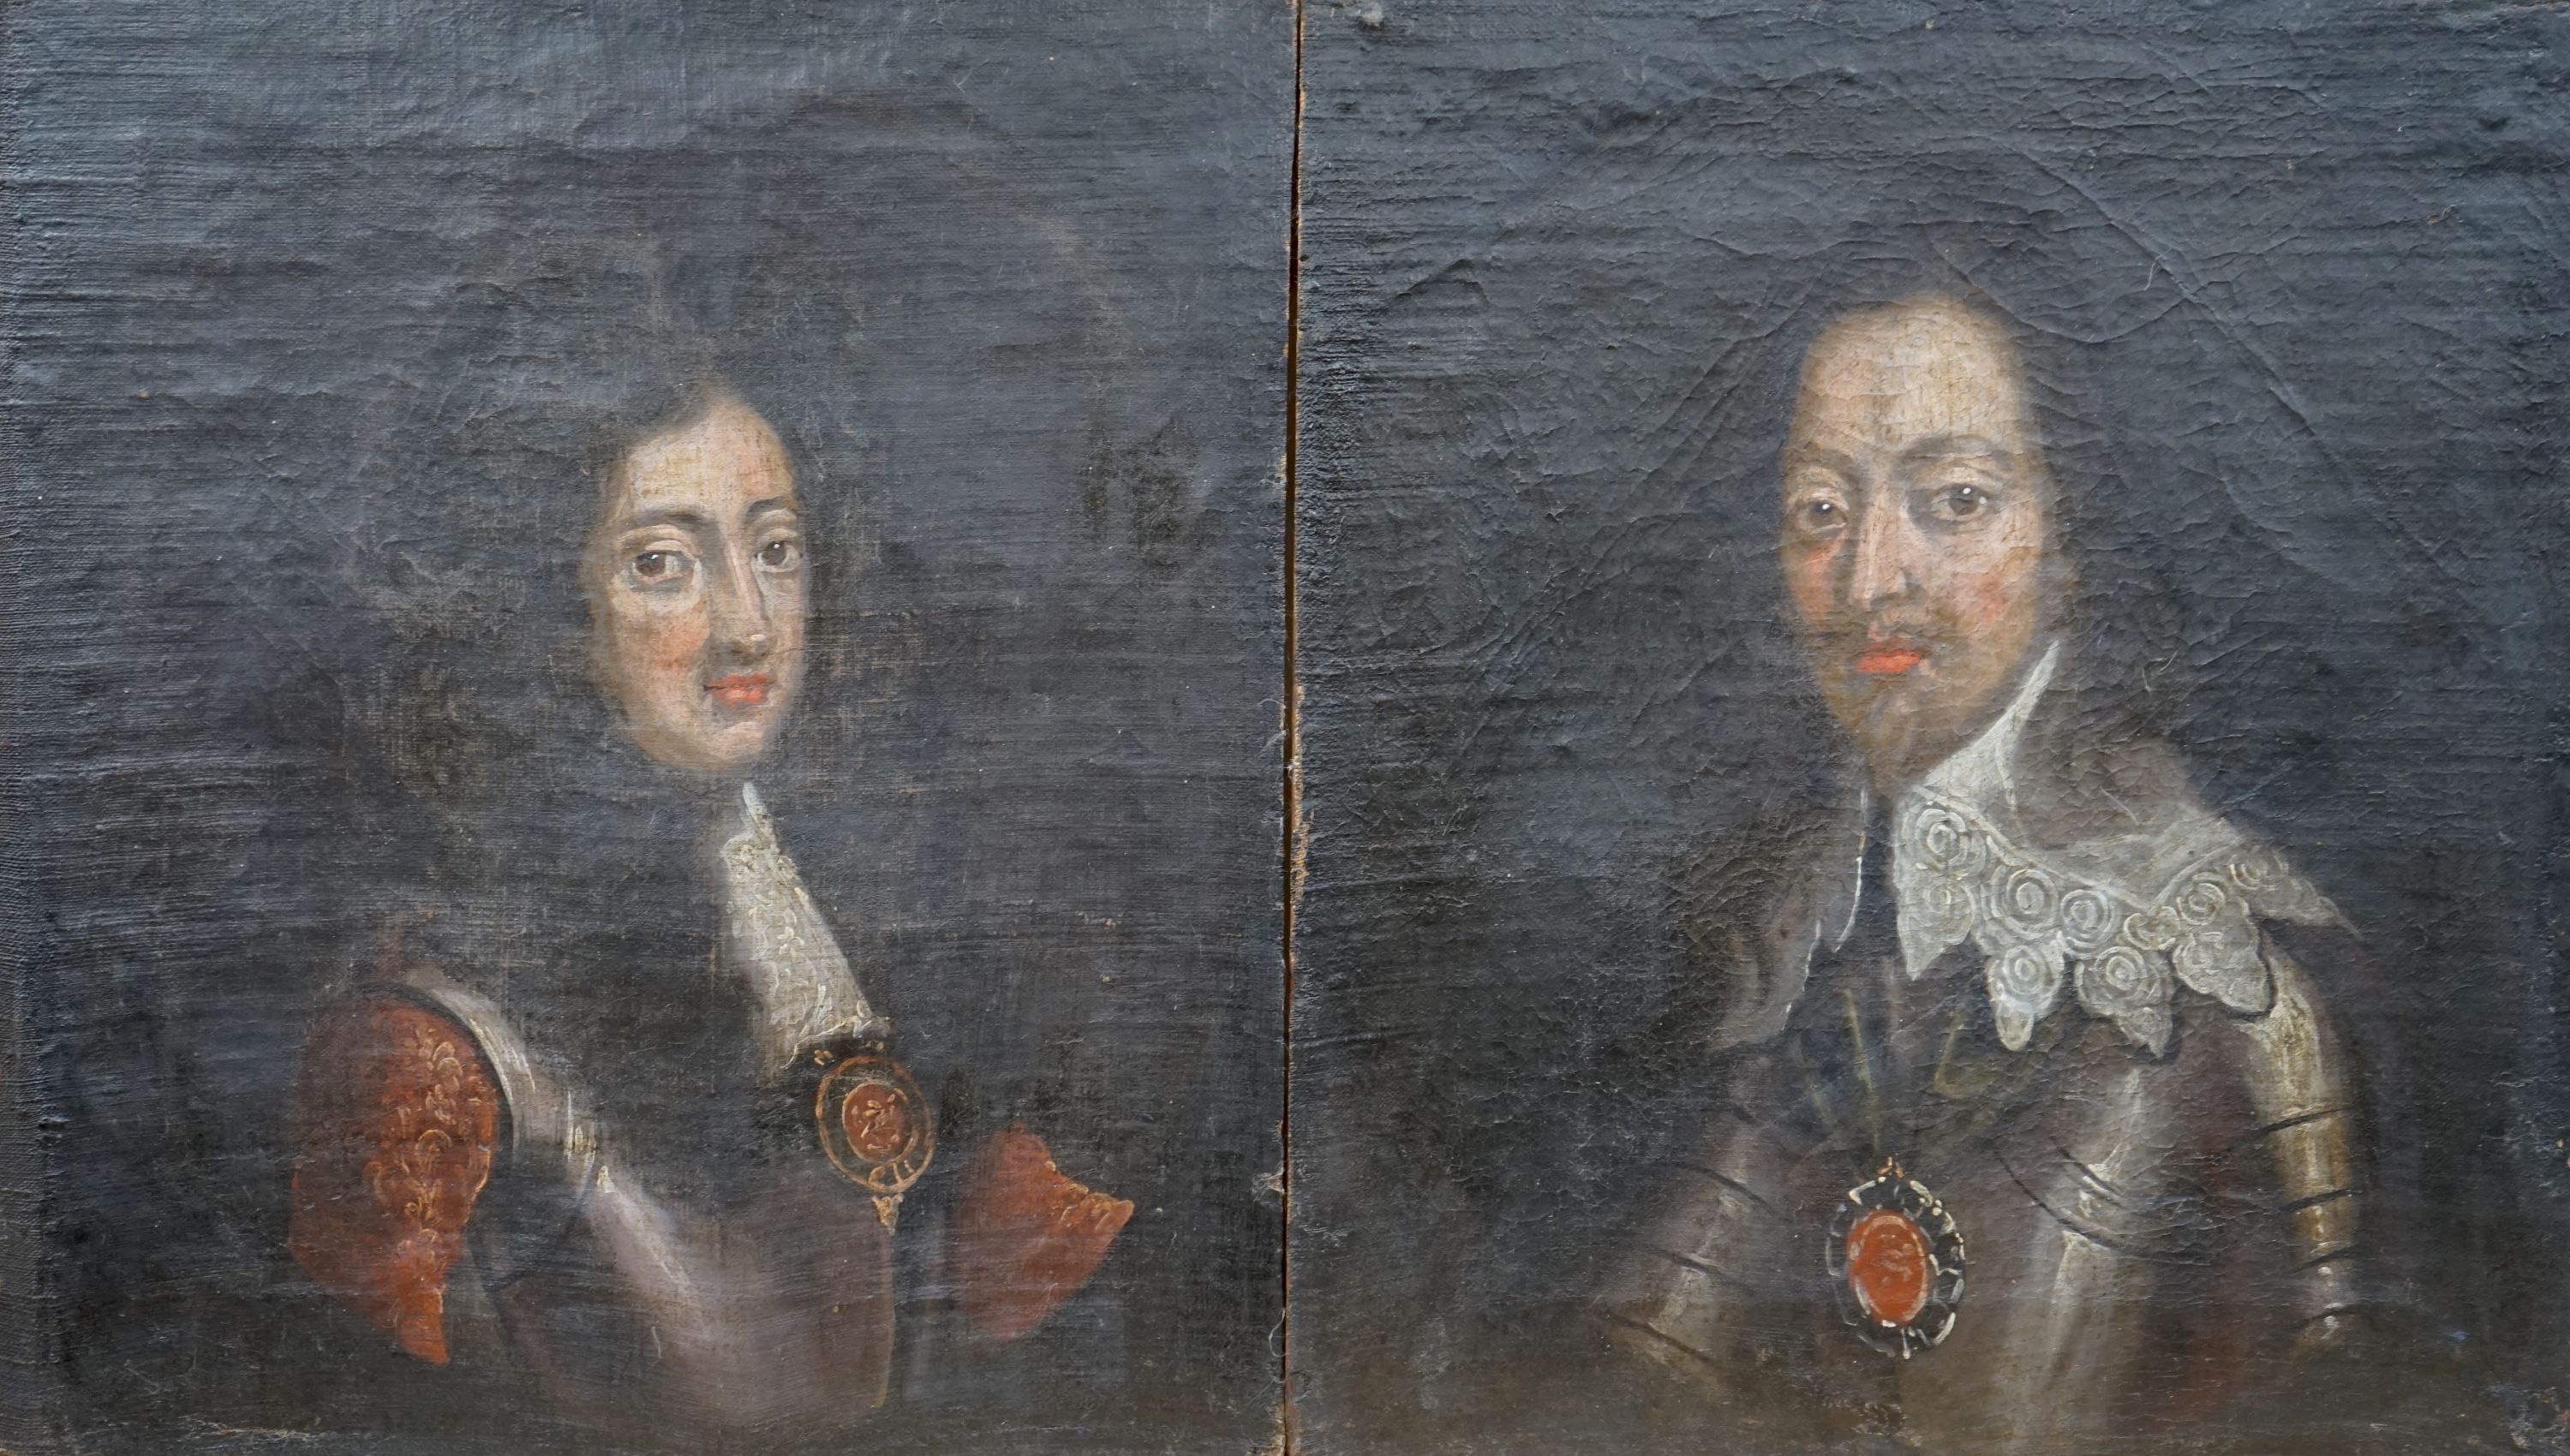 Late 18th century English School, pair of oils on canvas, Portraits of Charles I and Charles II, 36 x 31.5cm, unframed